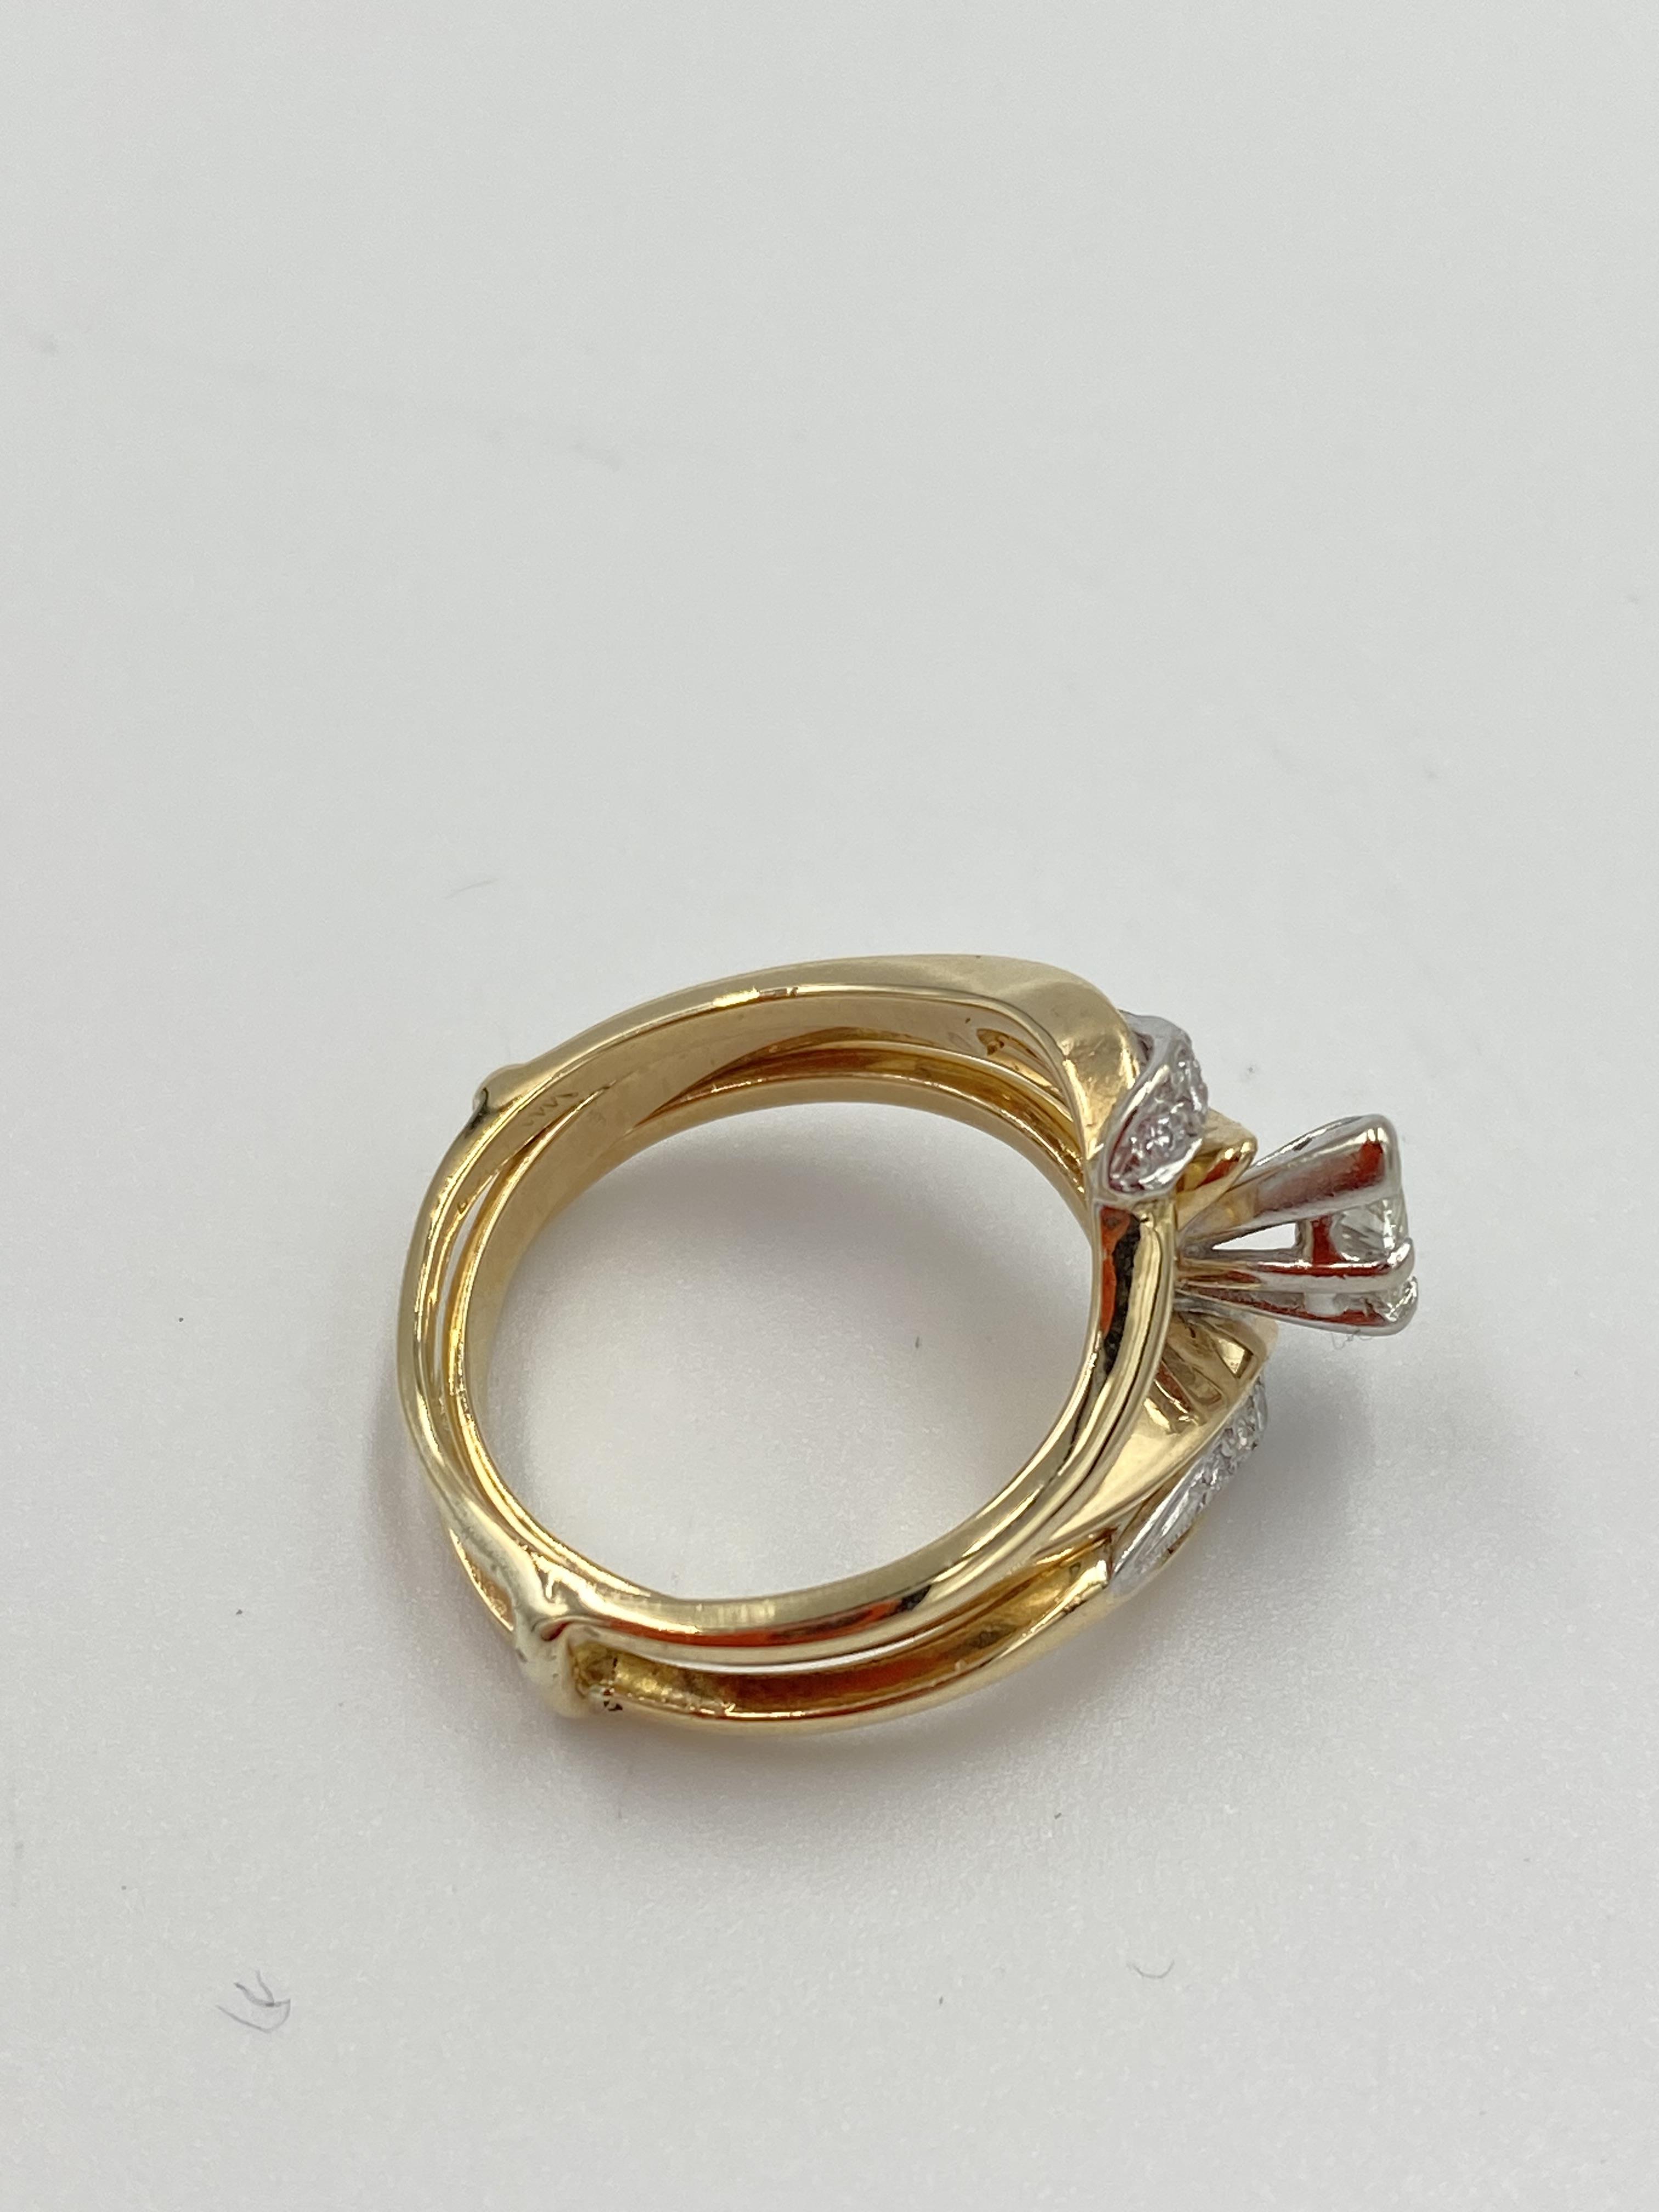 14ct gold and diamond ring - Image 5 of 6